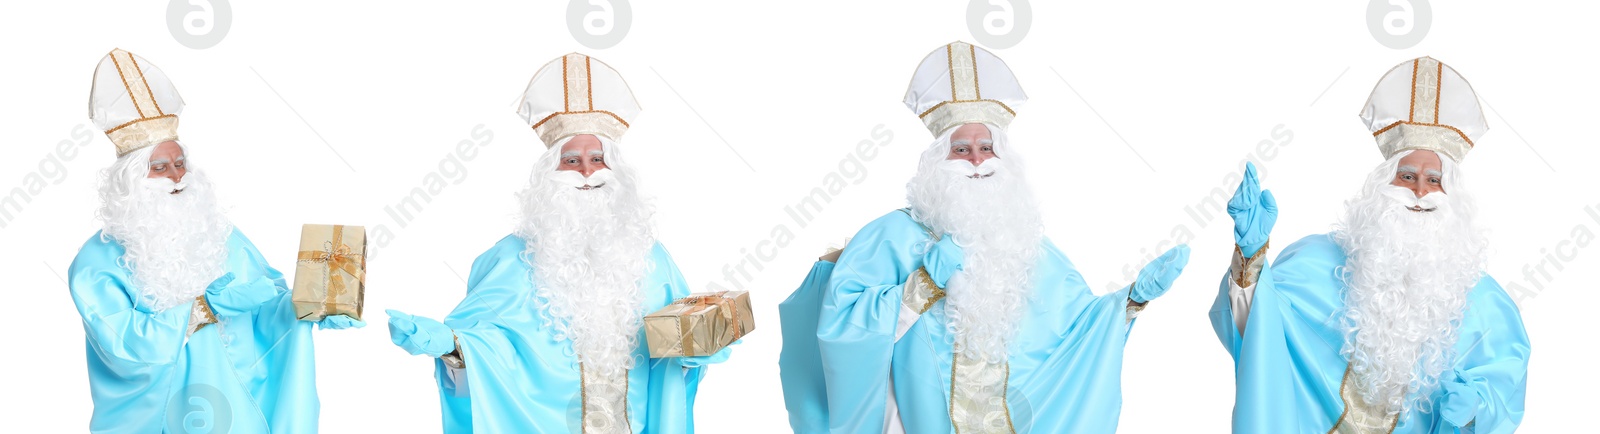 Image of Collage with photos of Saint Nicholas on white background. Banner design